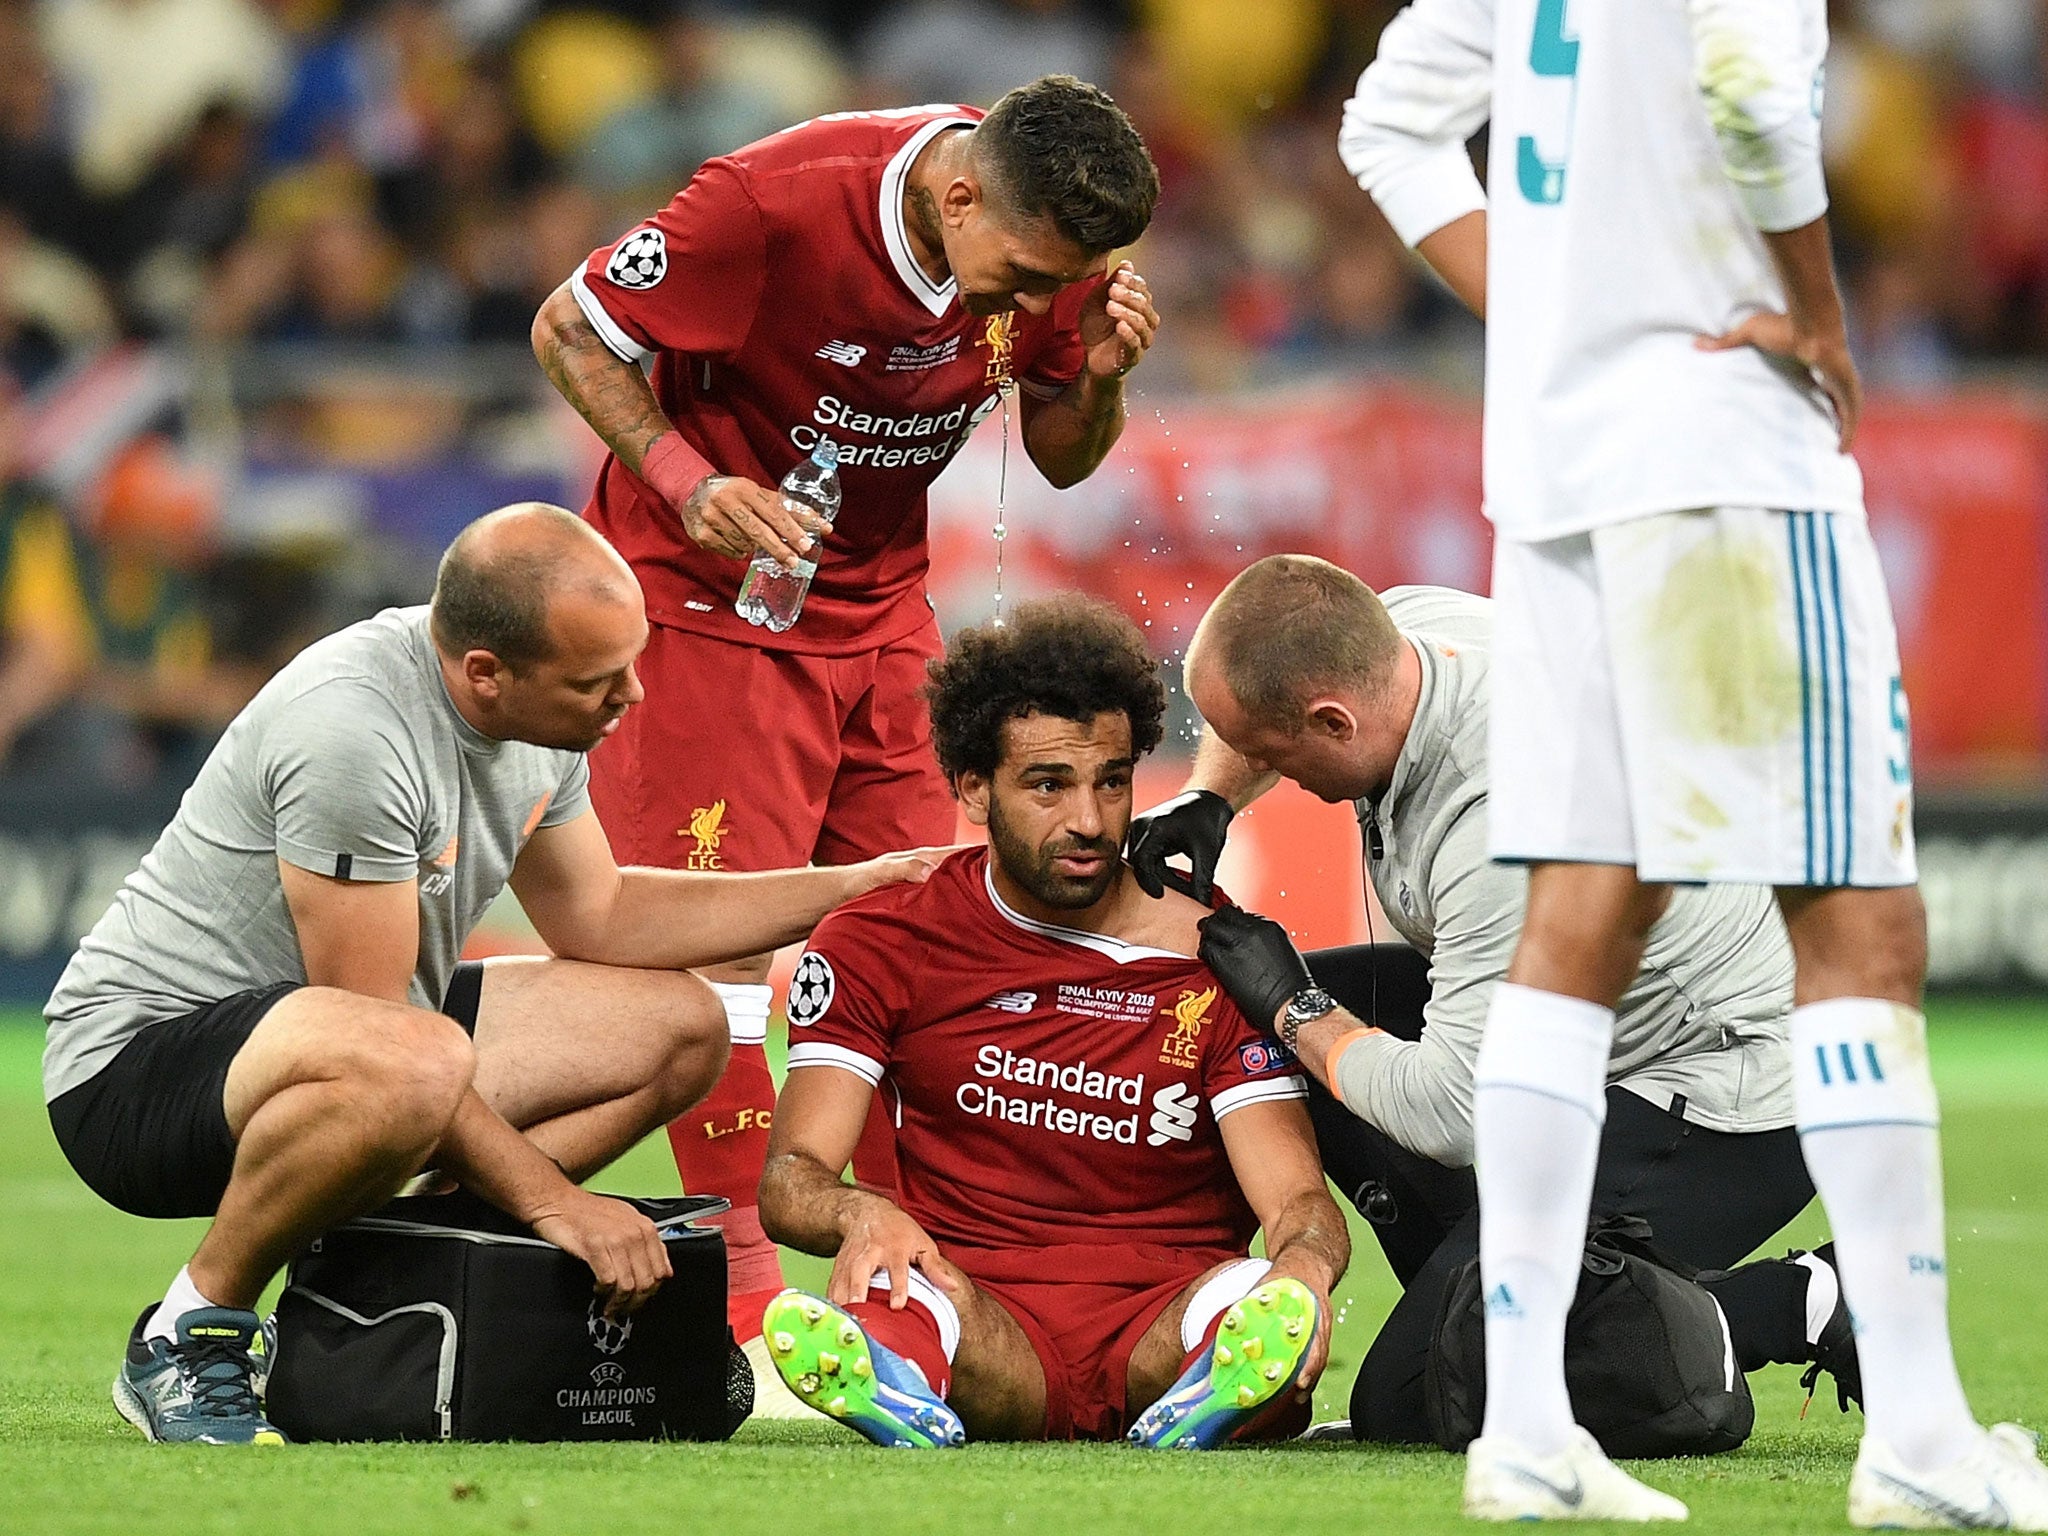 Mohamed Salah injury update: Jurgen Klopp confirms that Egyptian's World Cup now in doubt